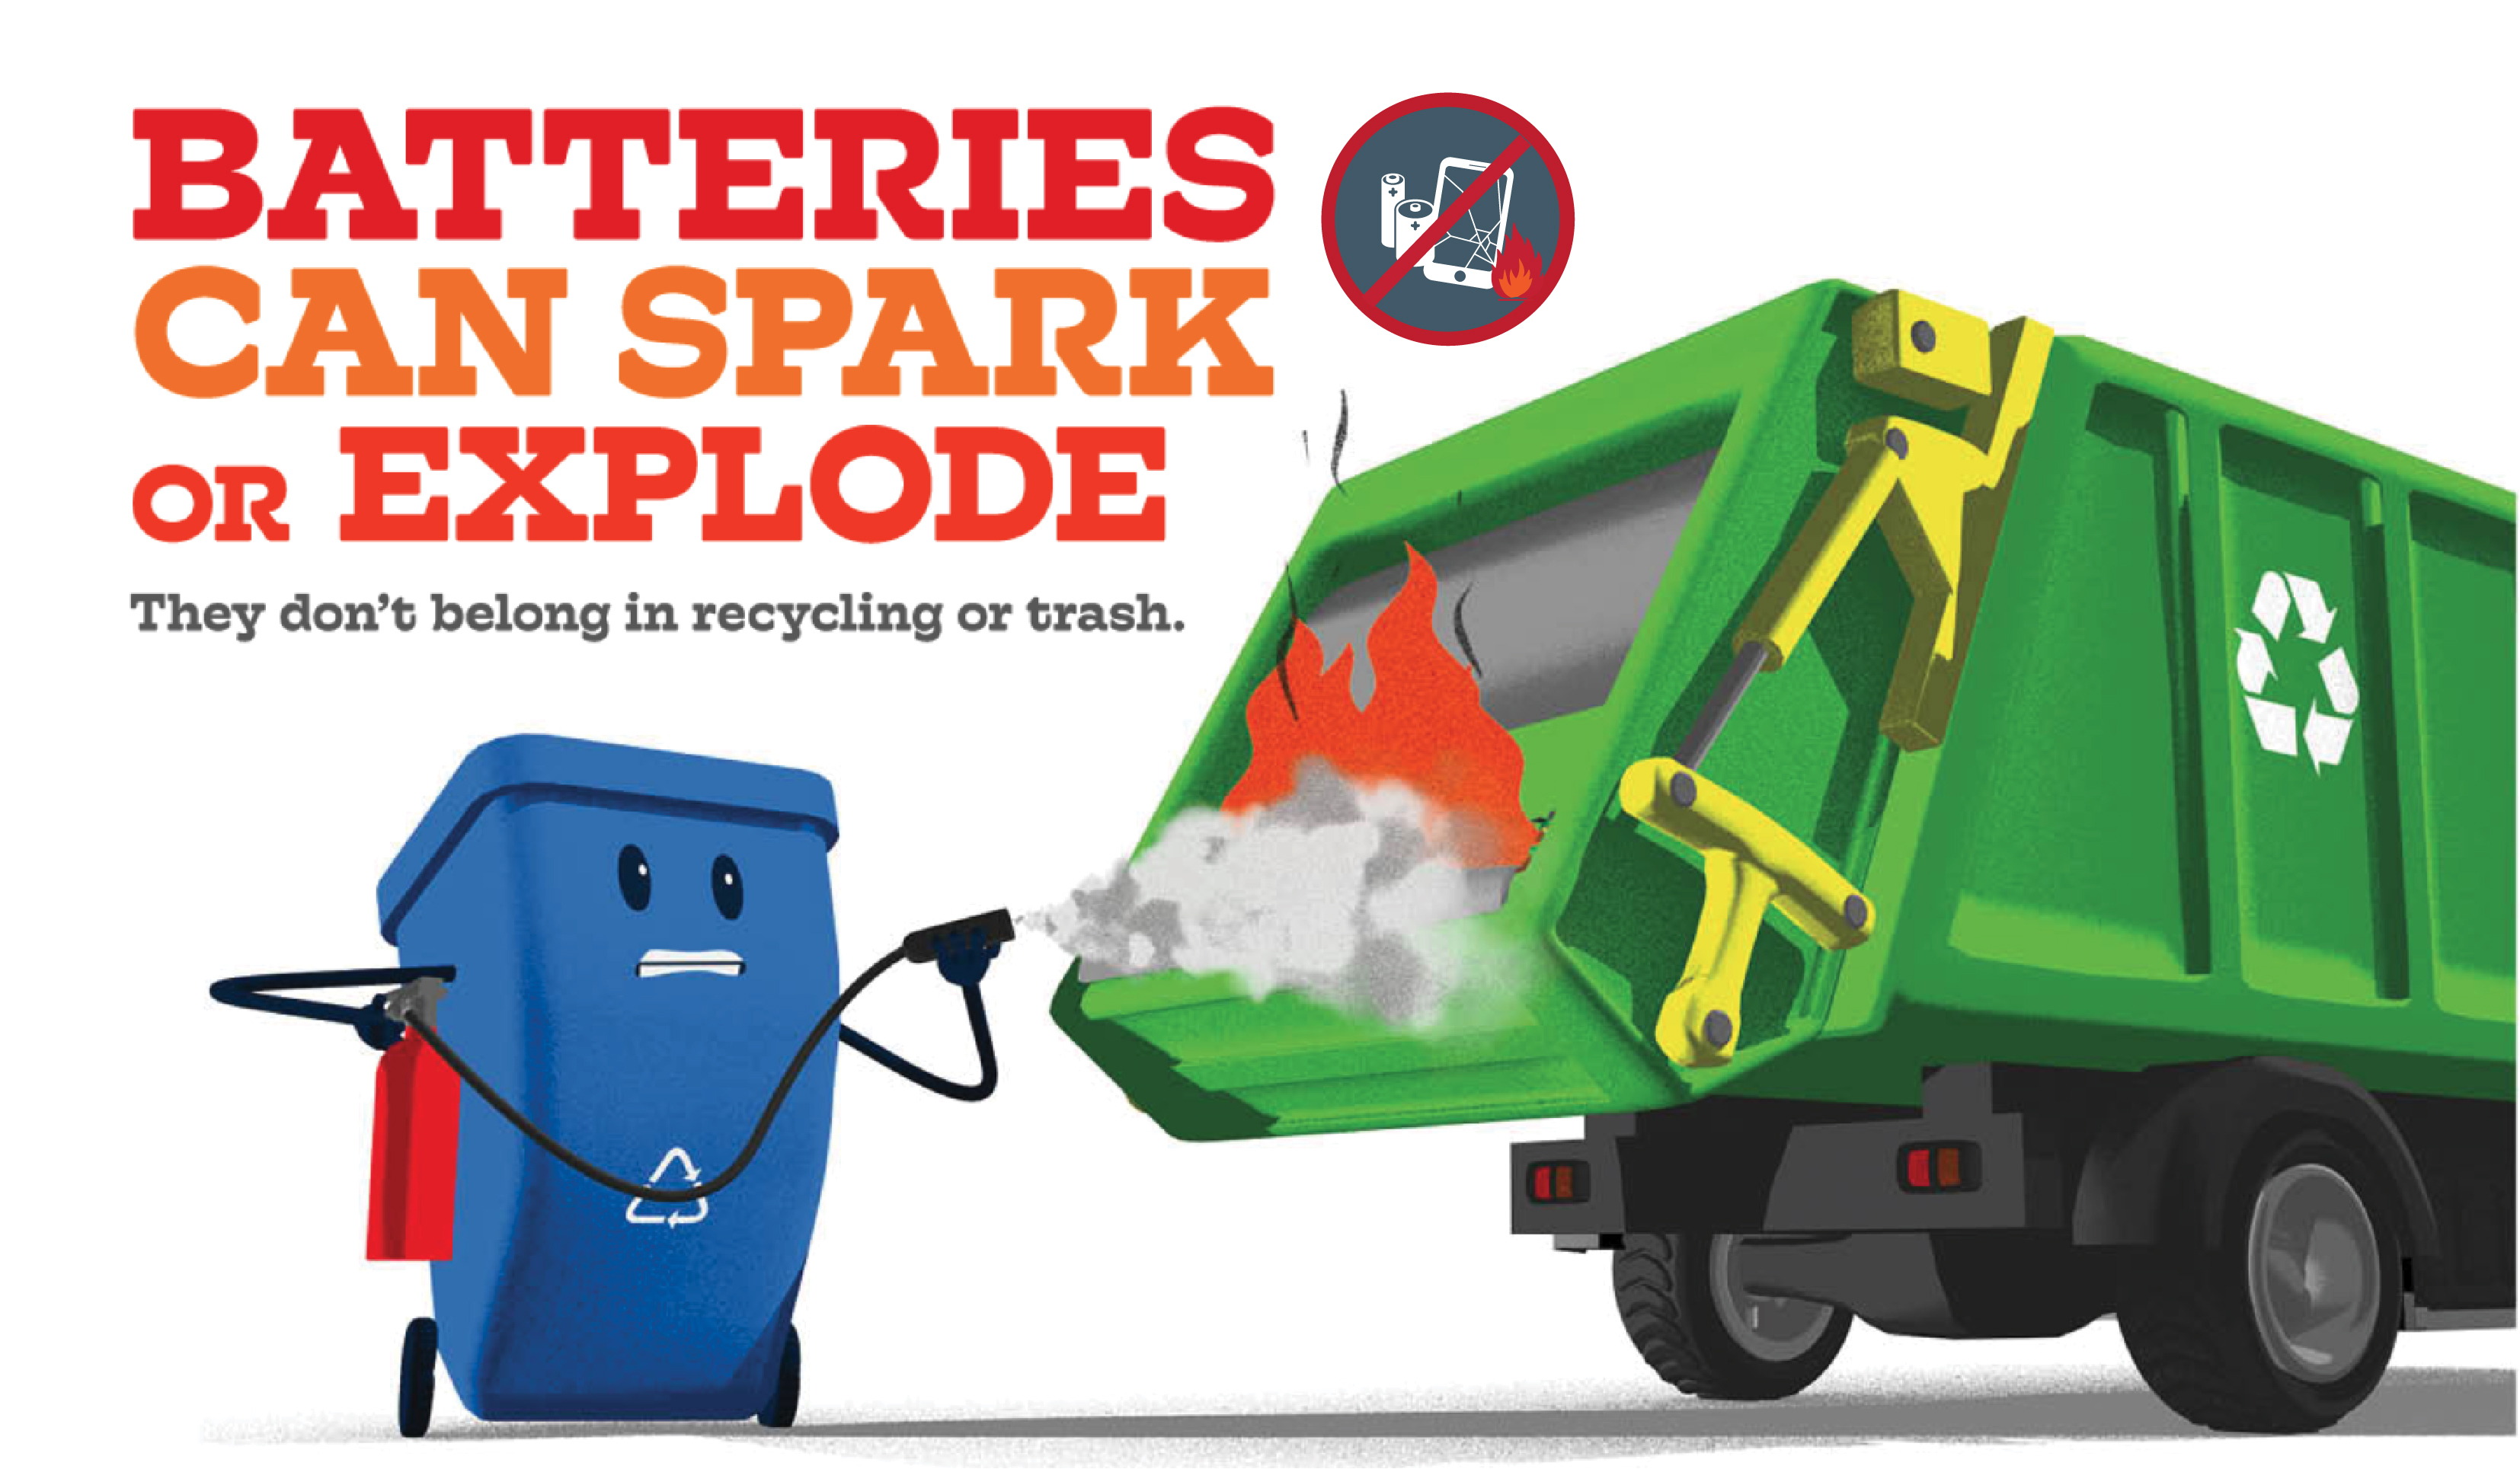 Batteries can spark or explode. They don't belong in the recycling or trash.